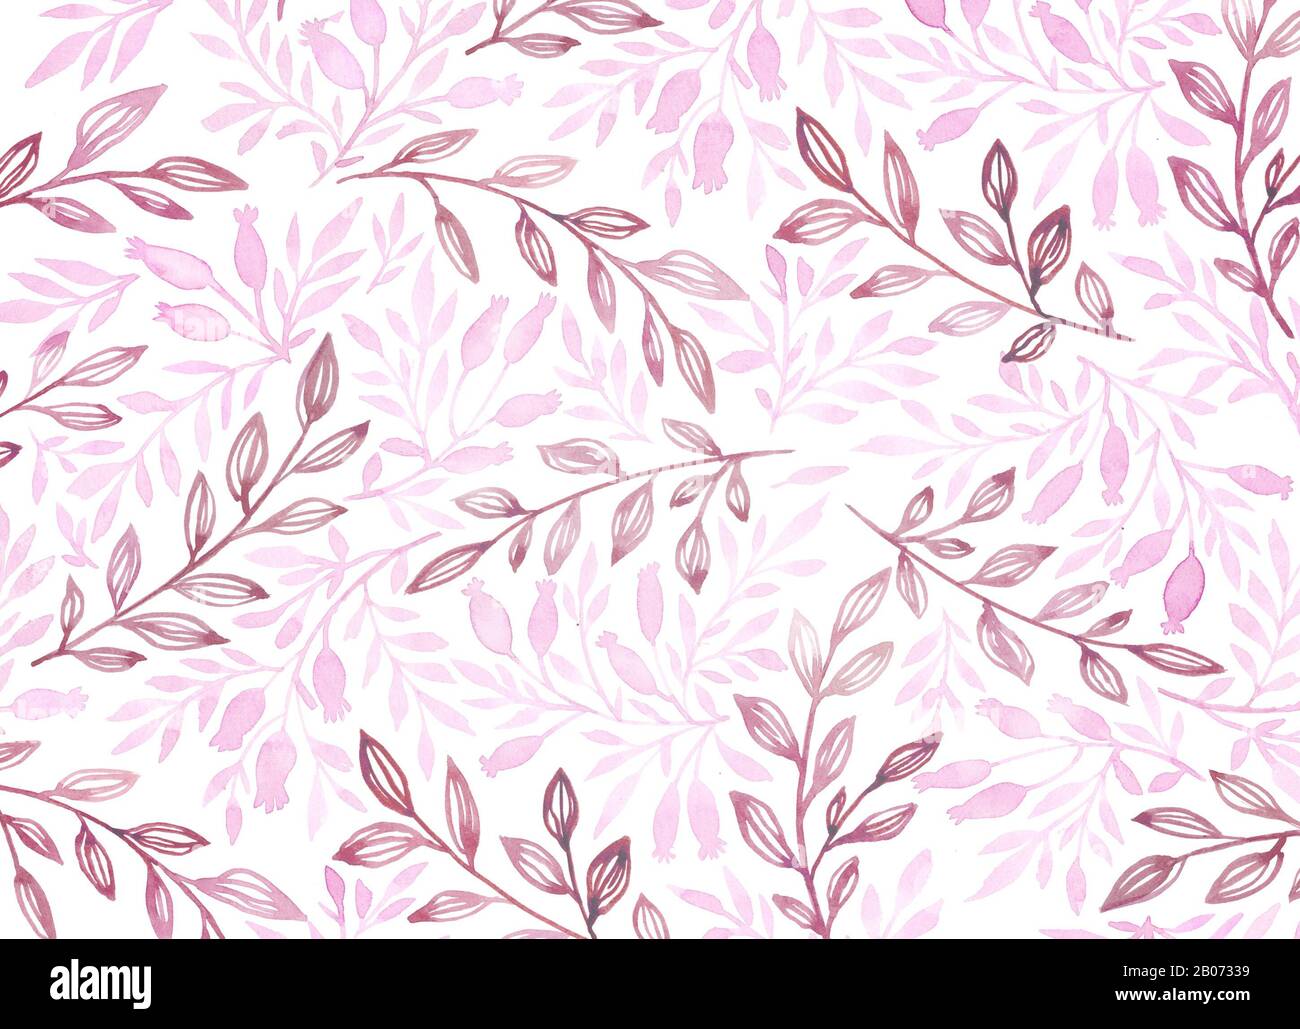 Watercolor Floral Background High Resolution Stock Photography And Images Alamy